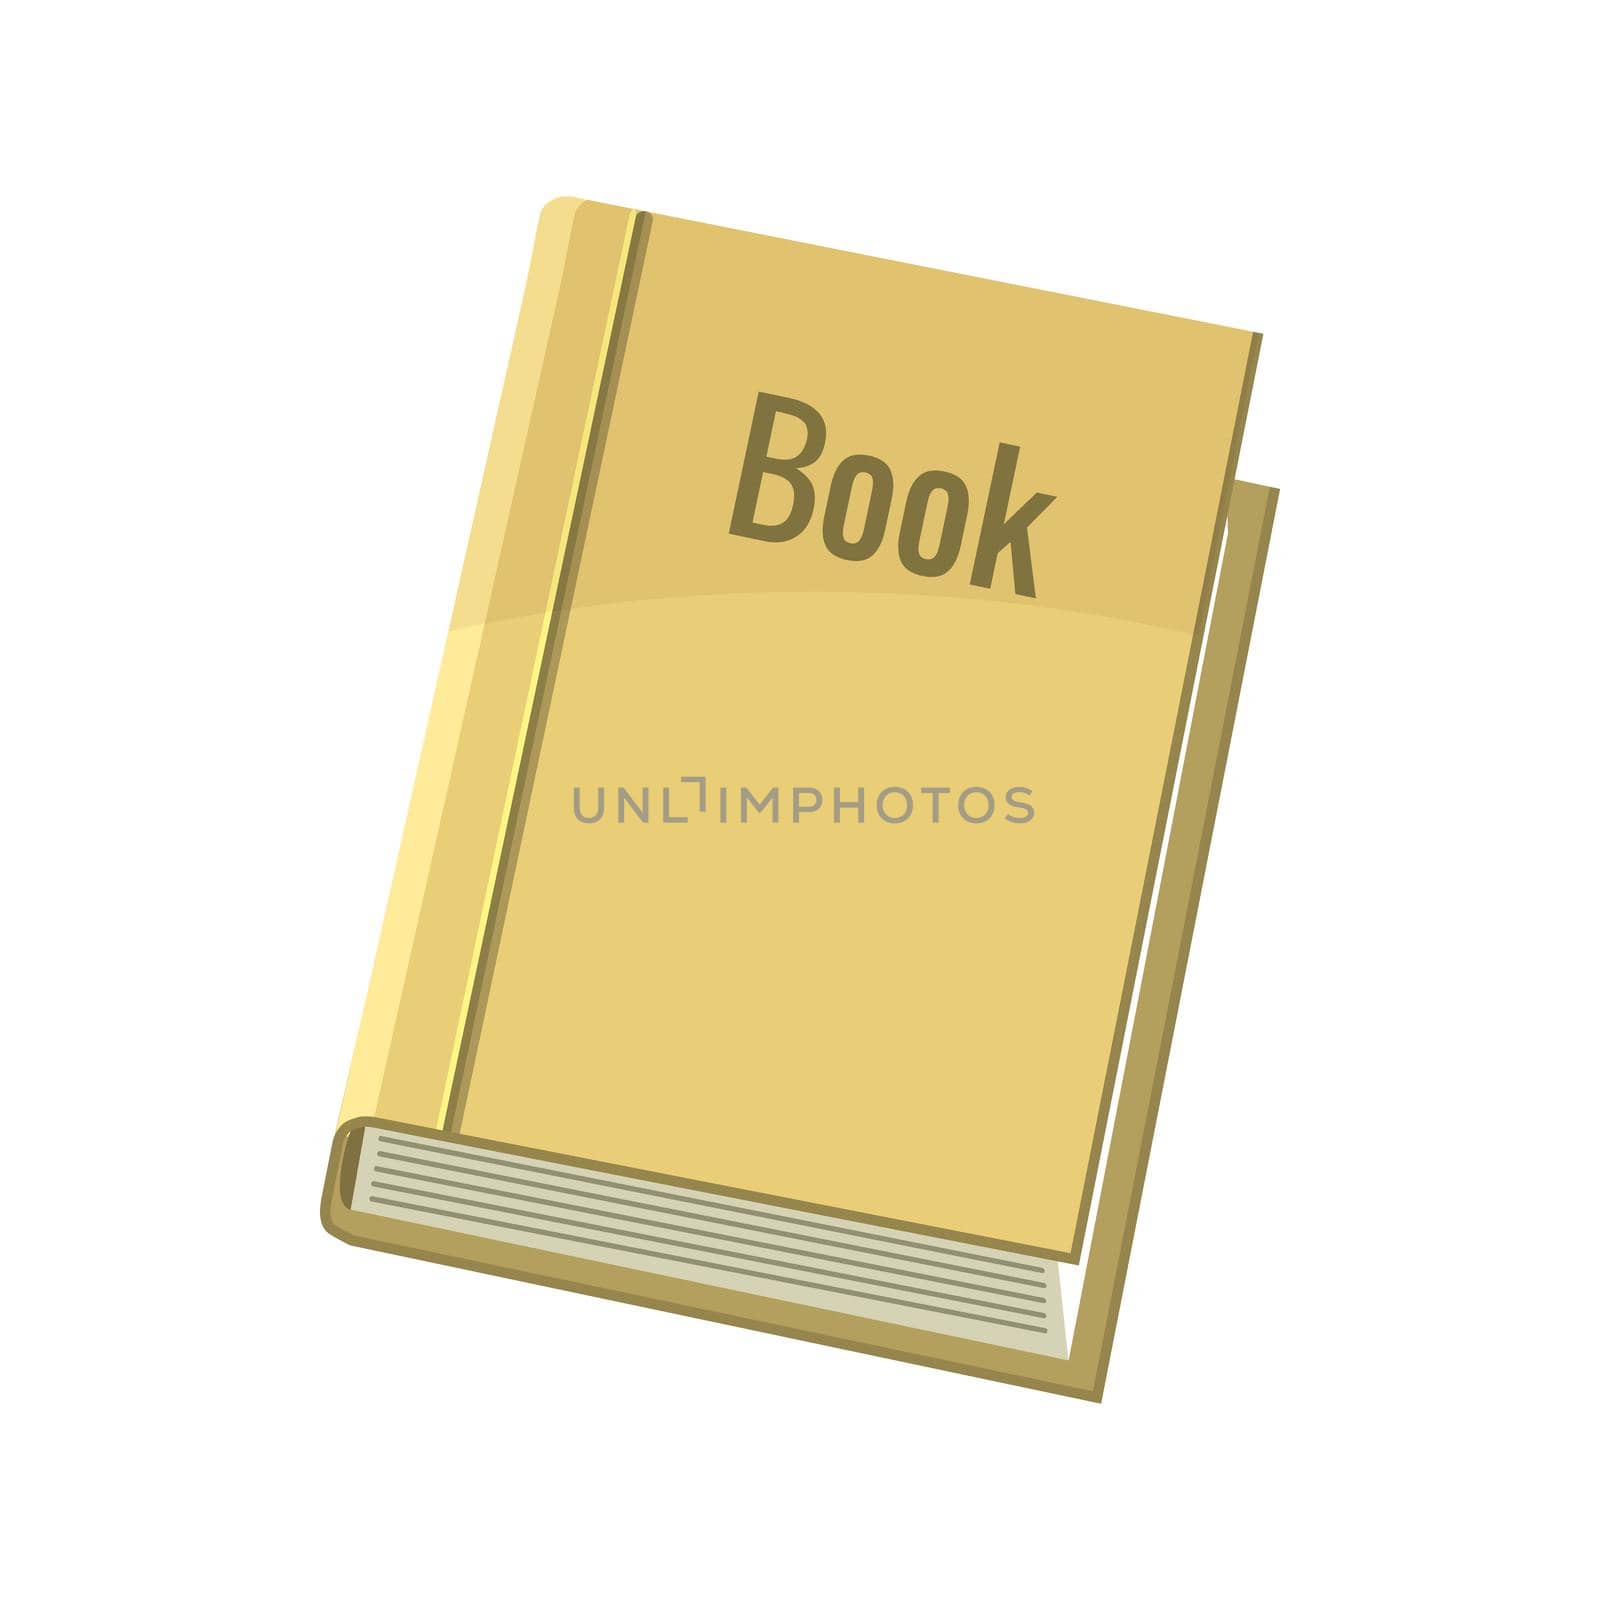 Book icon in cartoon style on a white background